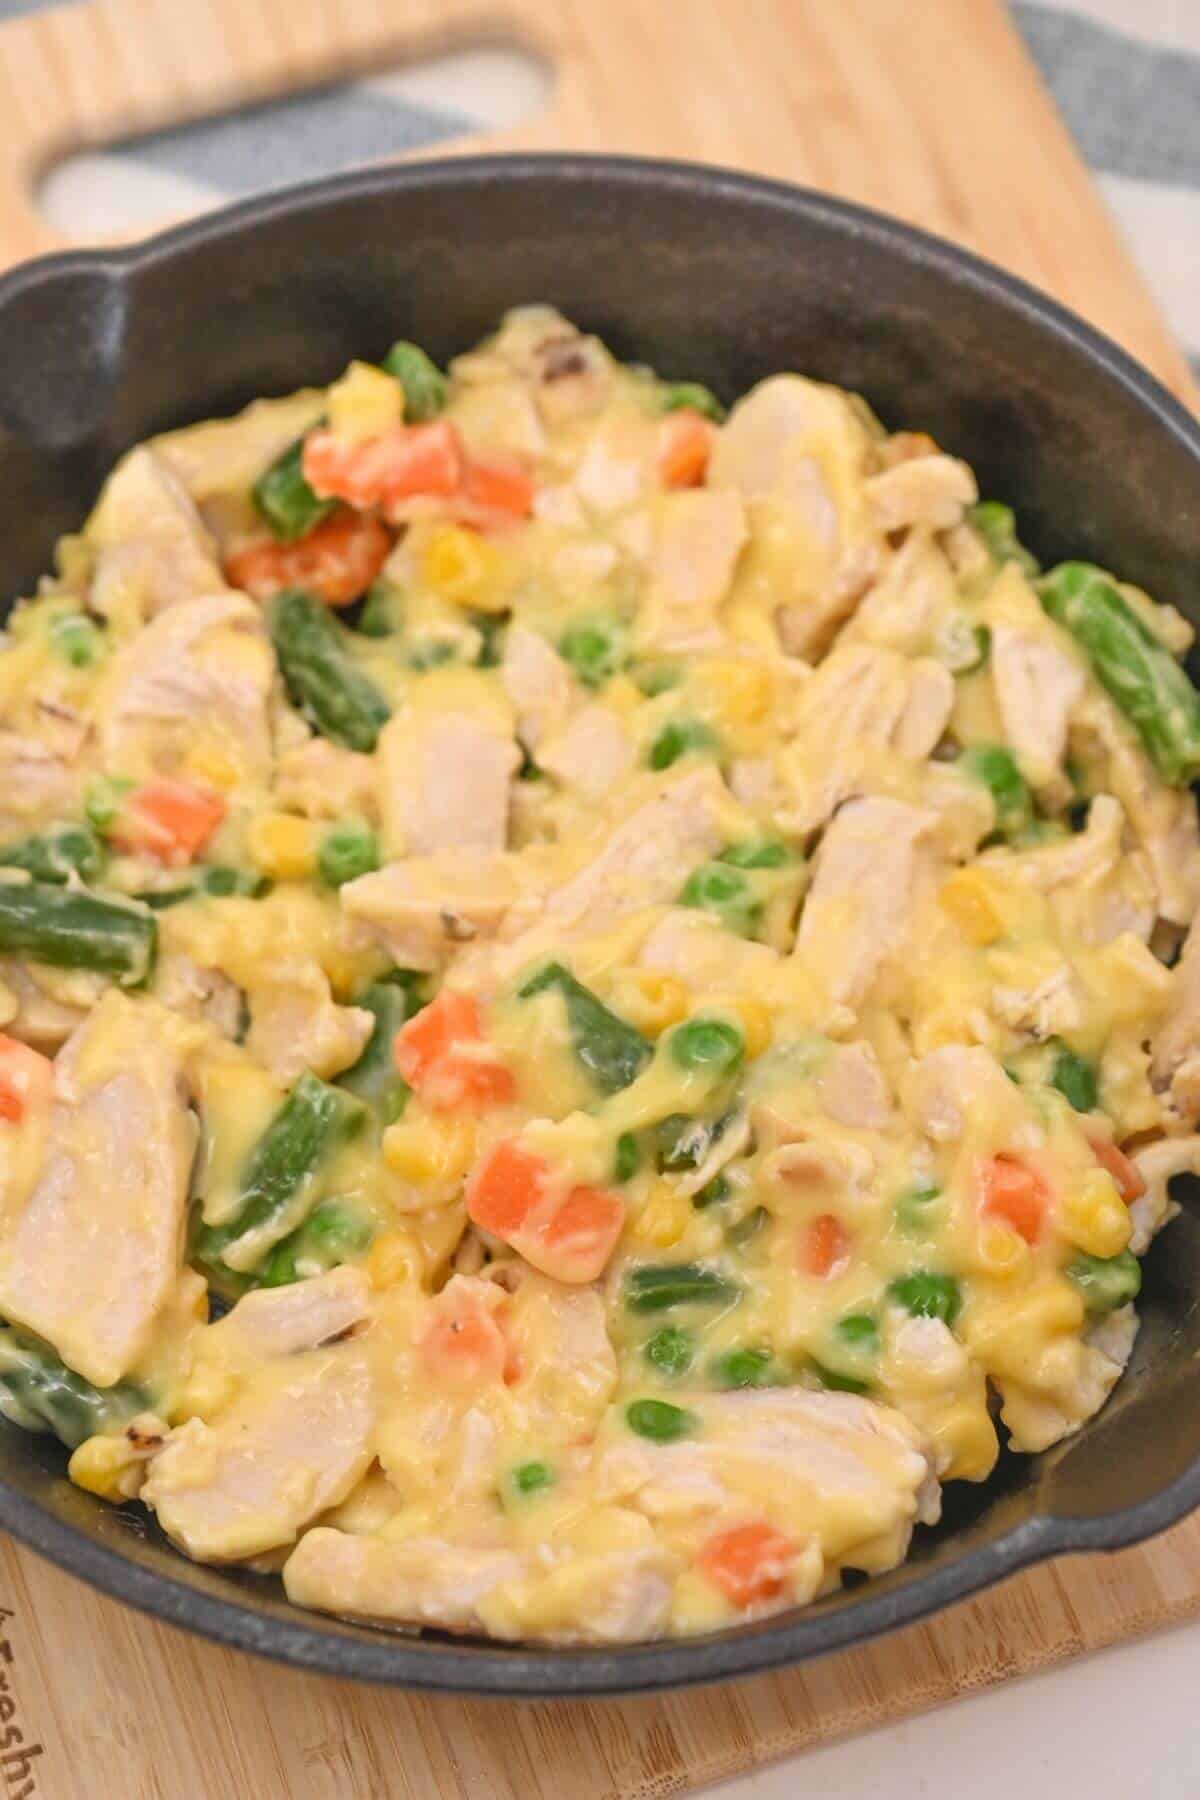 A skillet full of chicken and vegetables on a wooden cutting board.